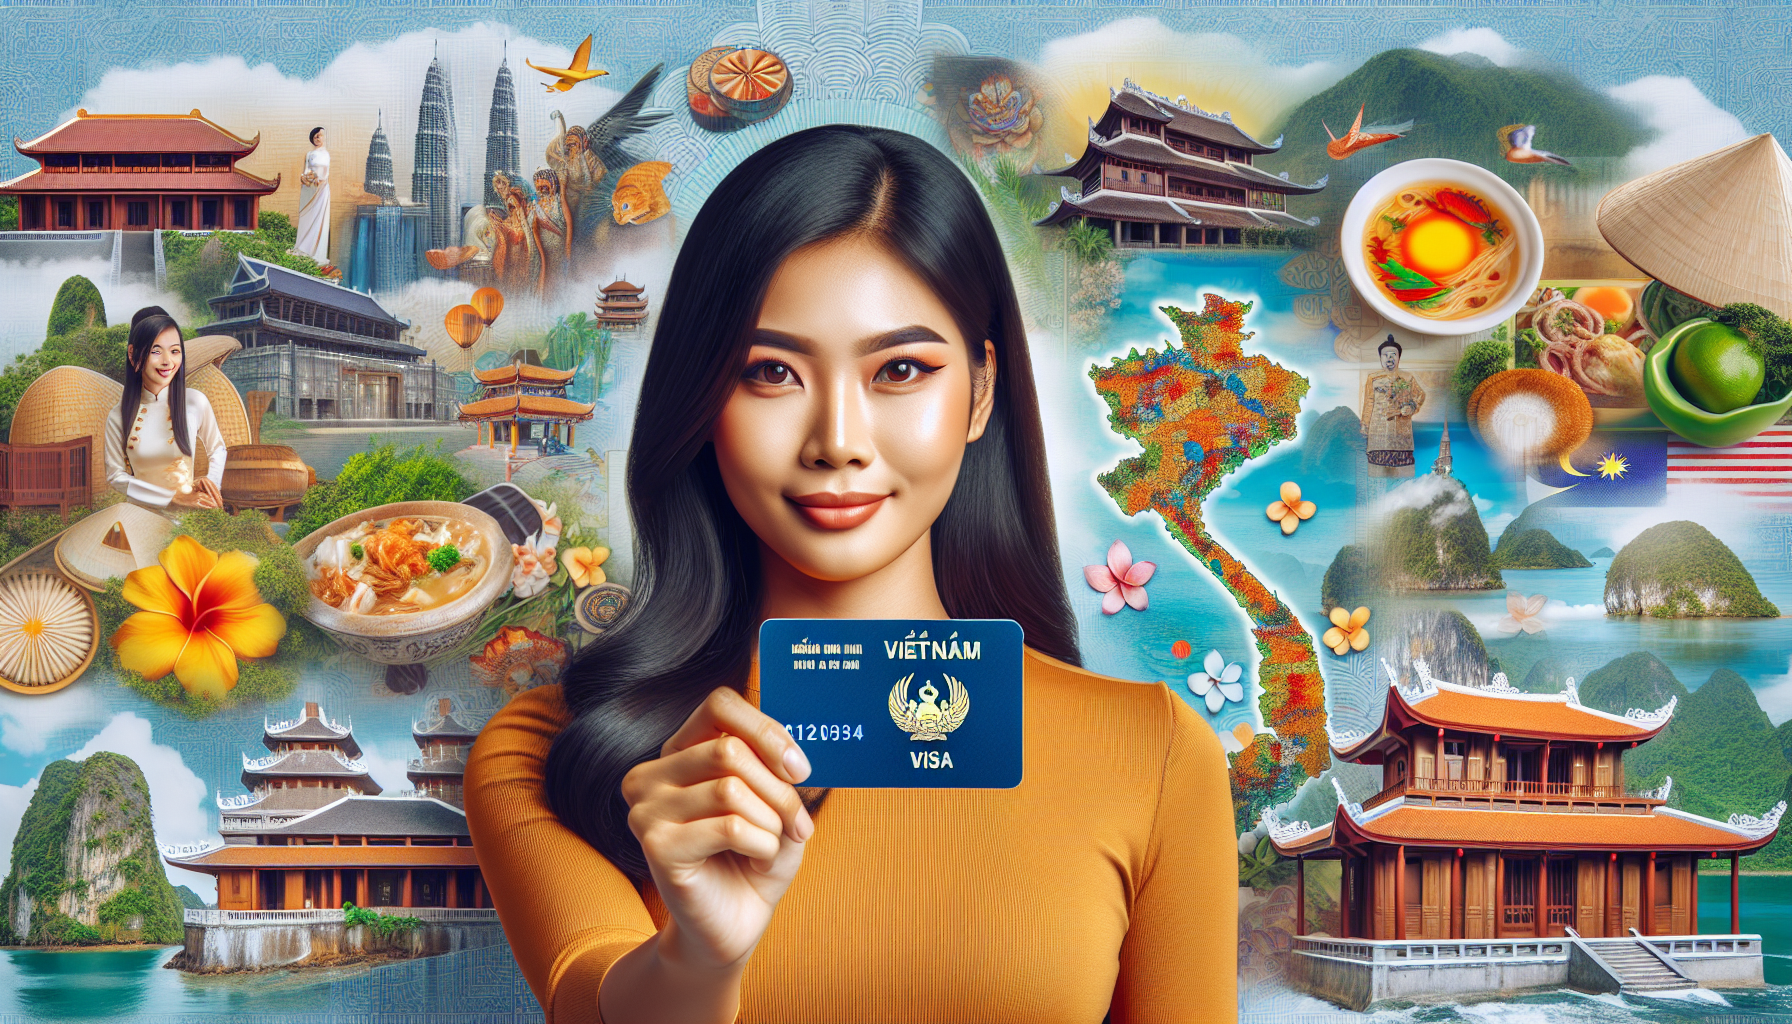 Do Malaysian Citizens Require Vietnamese Sponsorship for Business Visas? How to Apply?